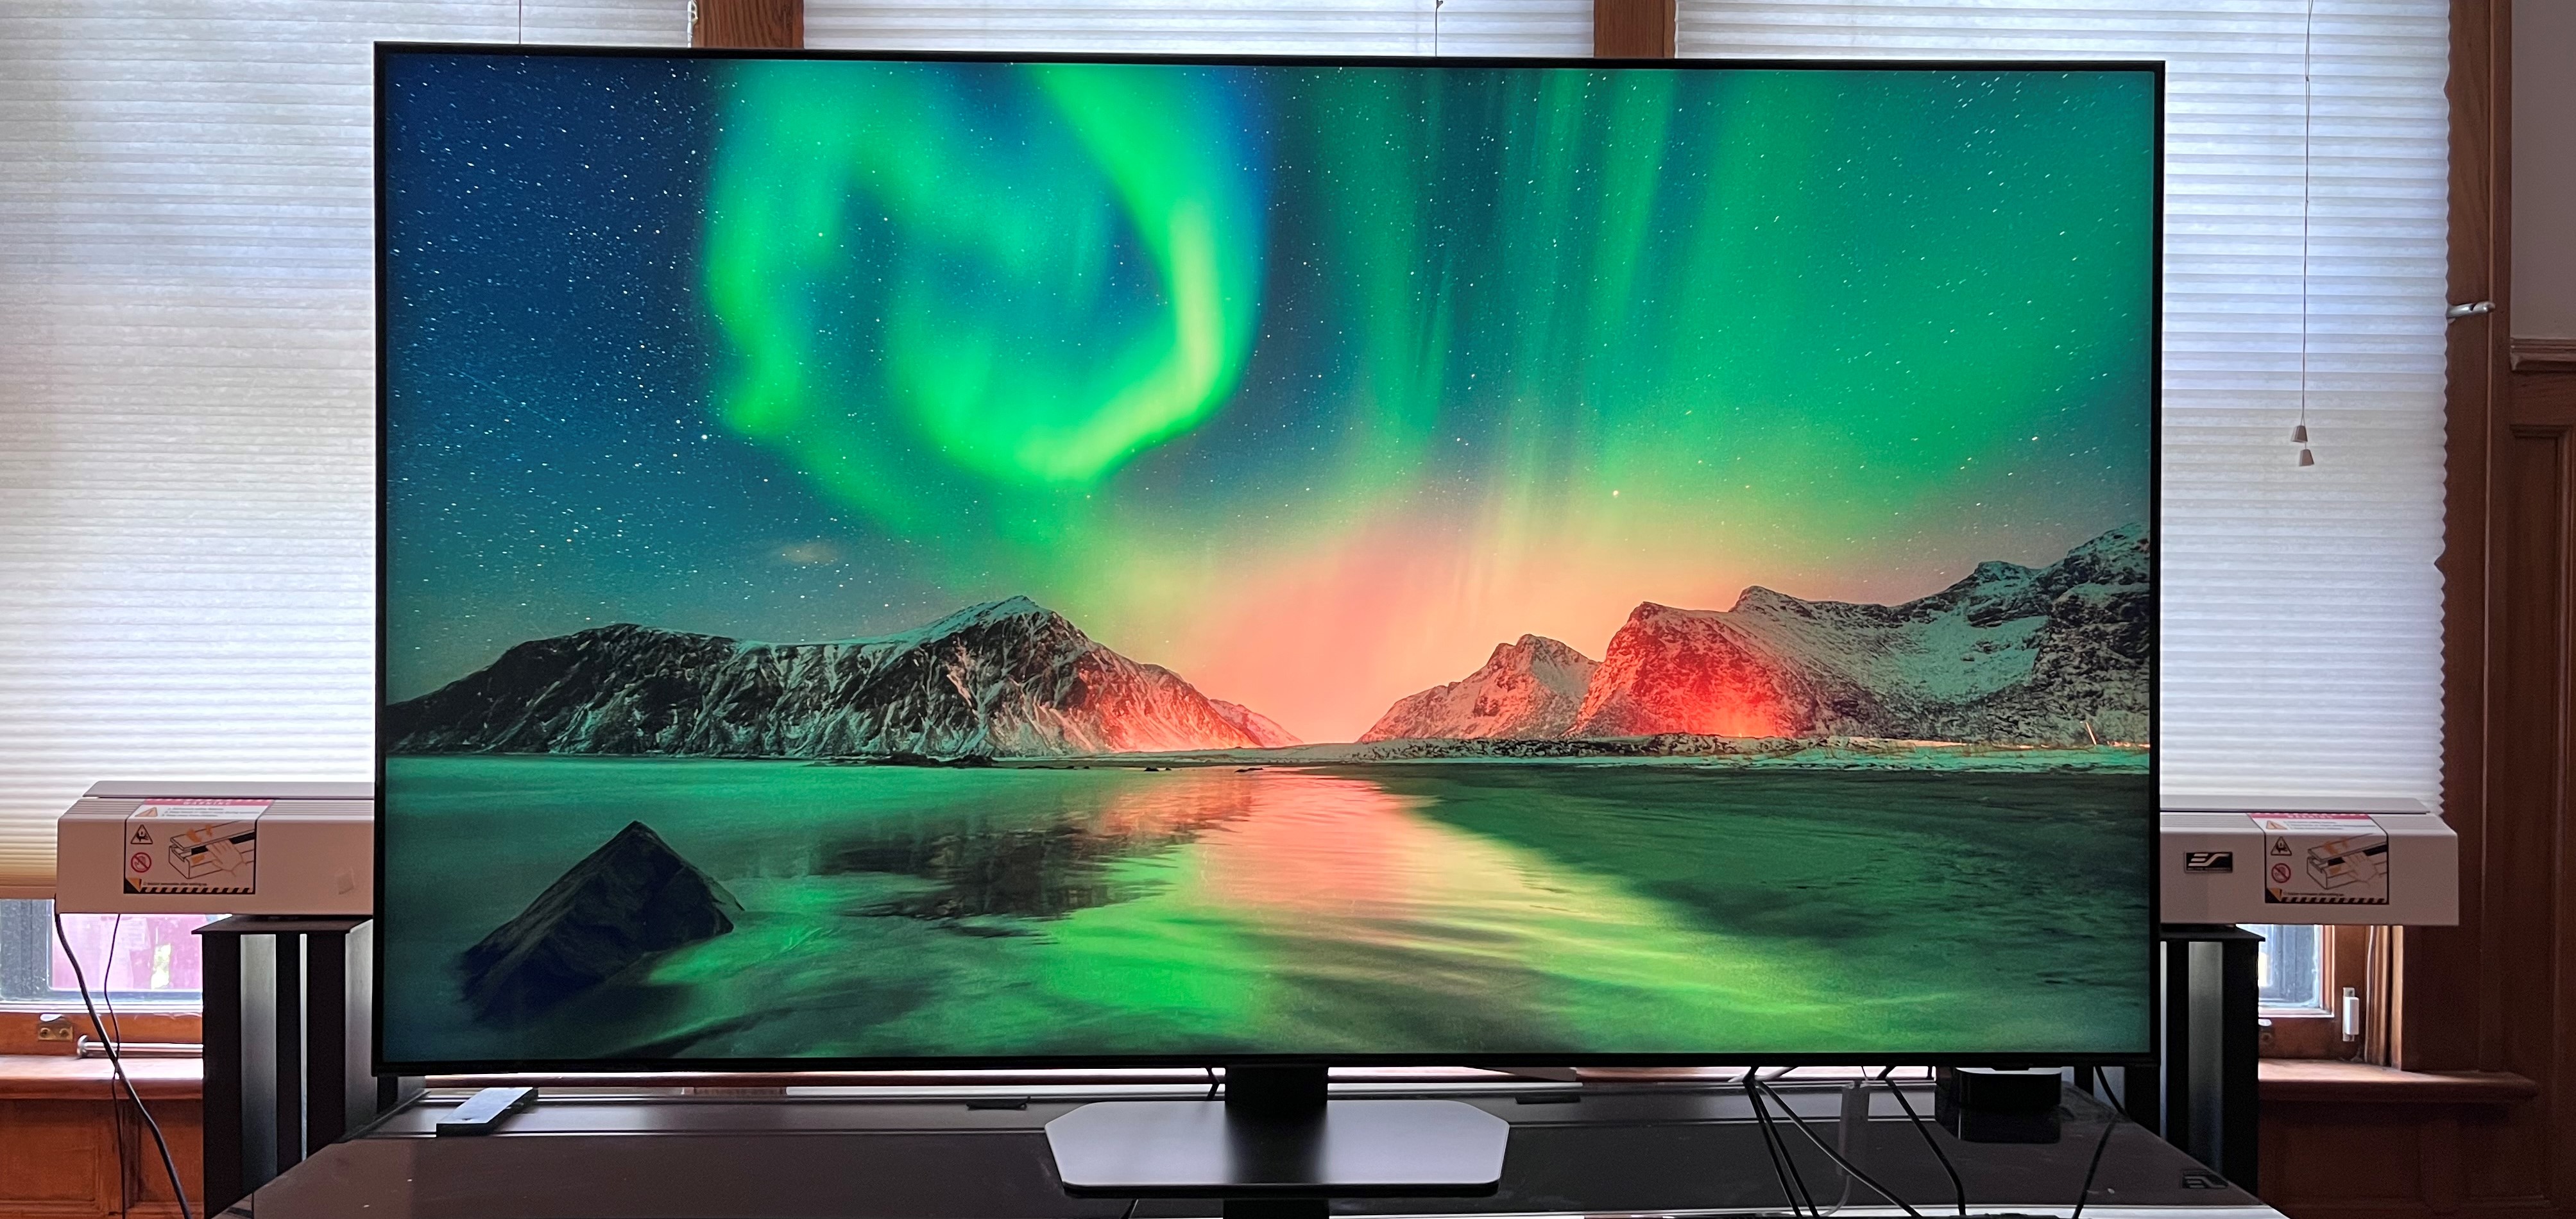 Best Samsung TVs: QLED, Mini LEDs, and more